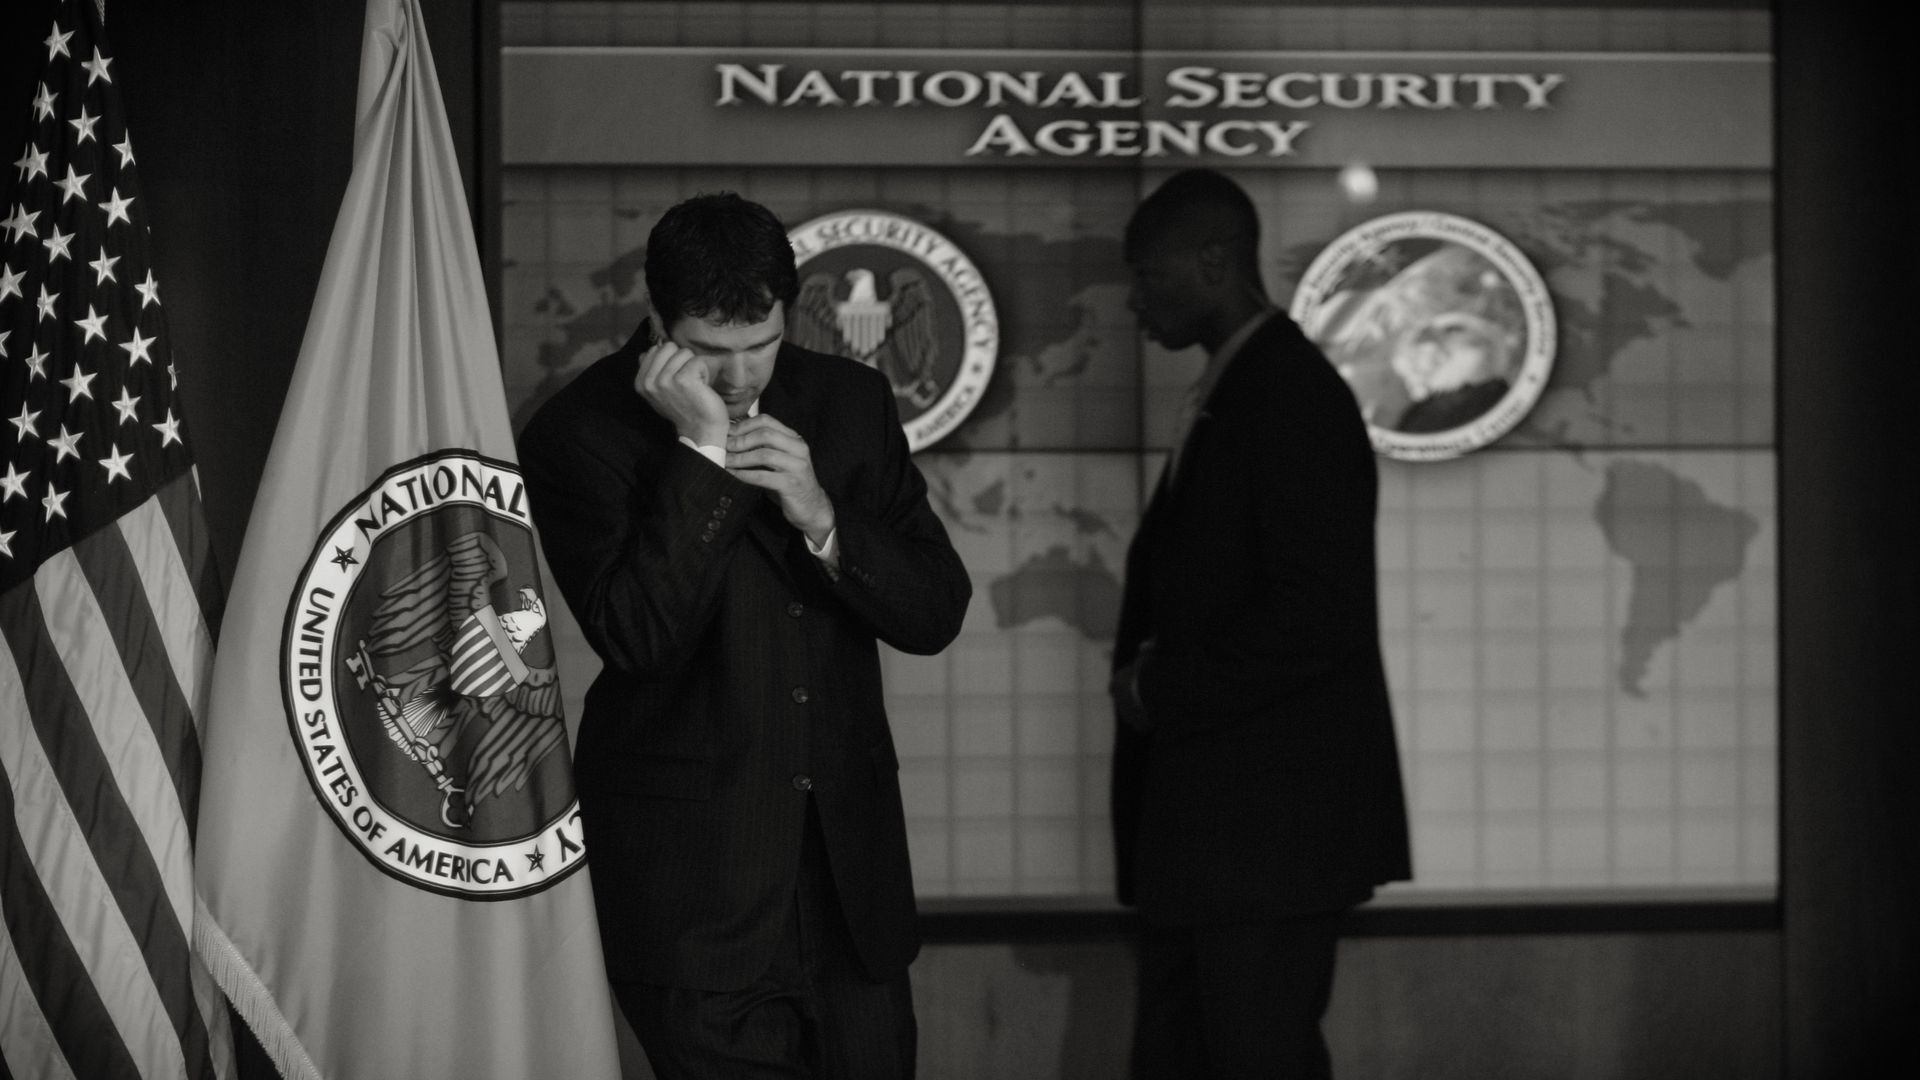 Two men stand below text that reads "National Security Agency"